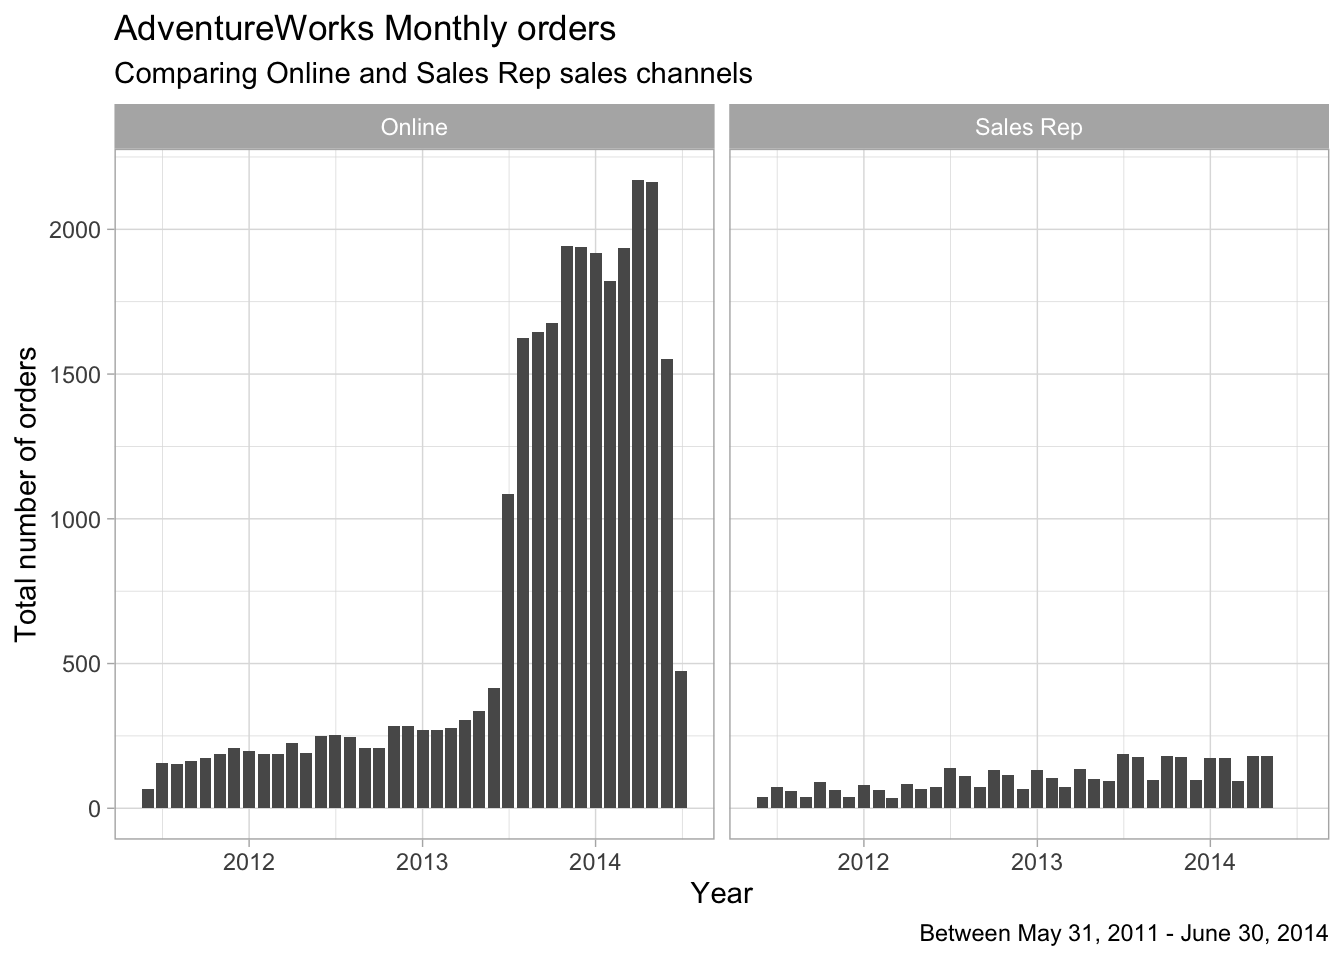 AdventureWorks Monthly Orders by Channel